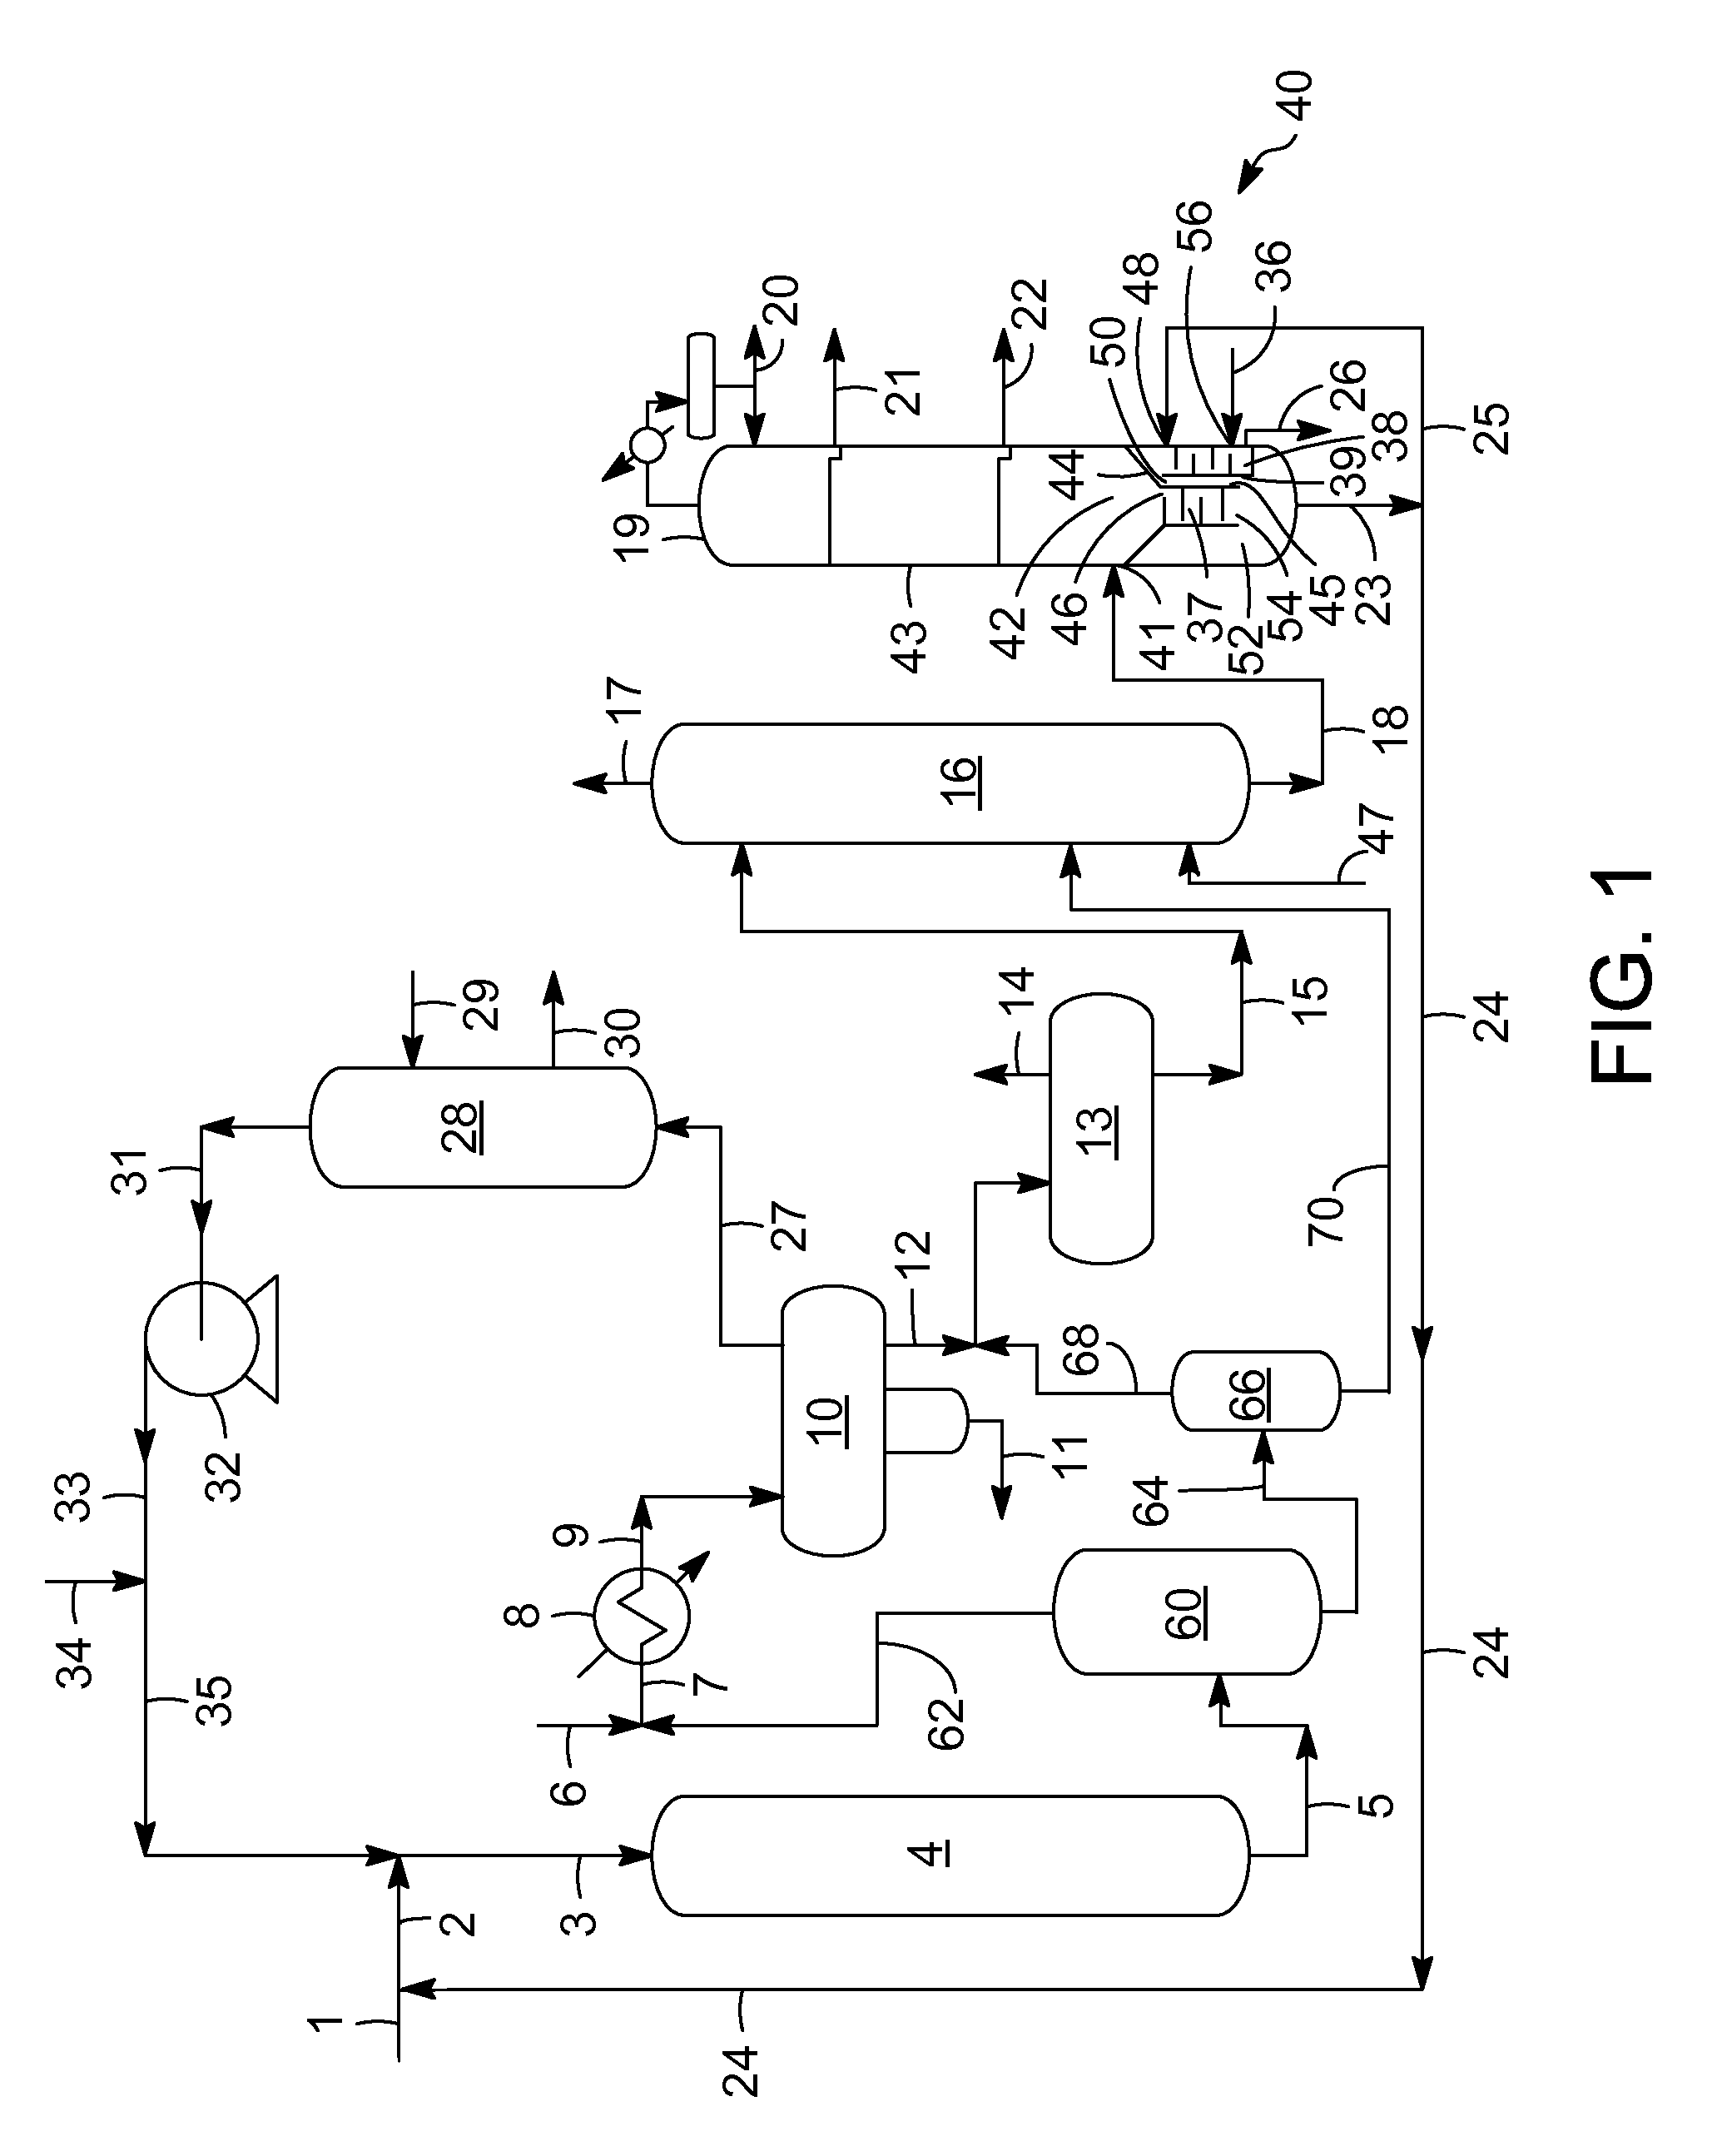 Apparatus for removing heavy polynuclear aromatic compounds from a hydroprocessed stream